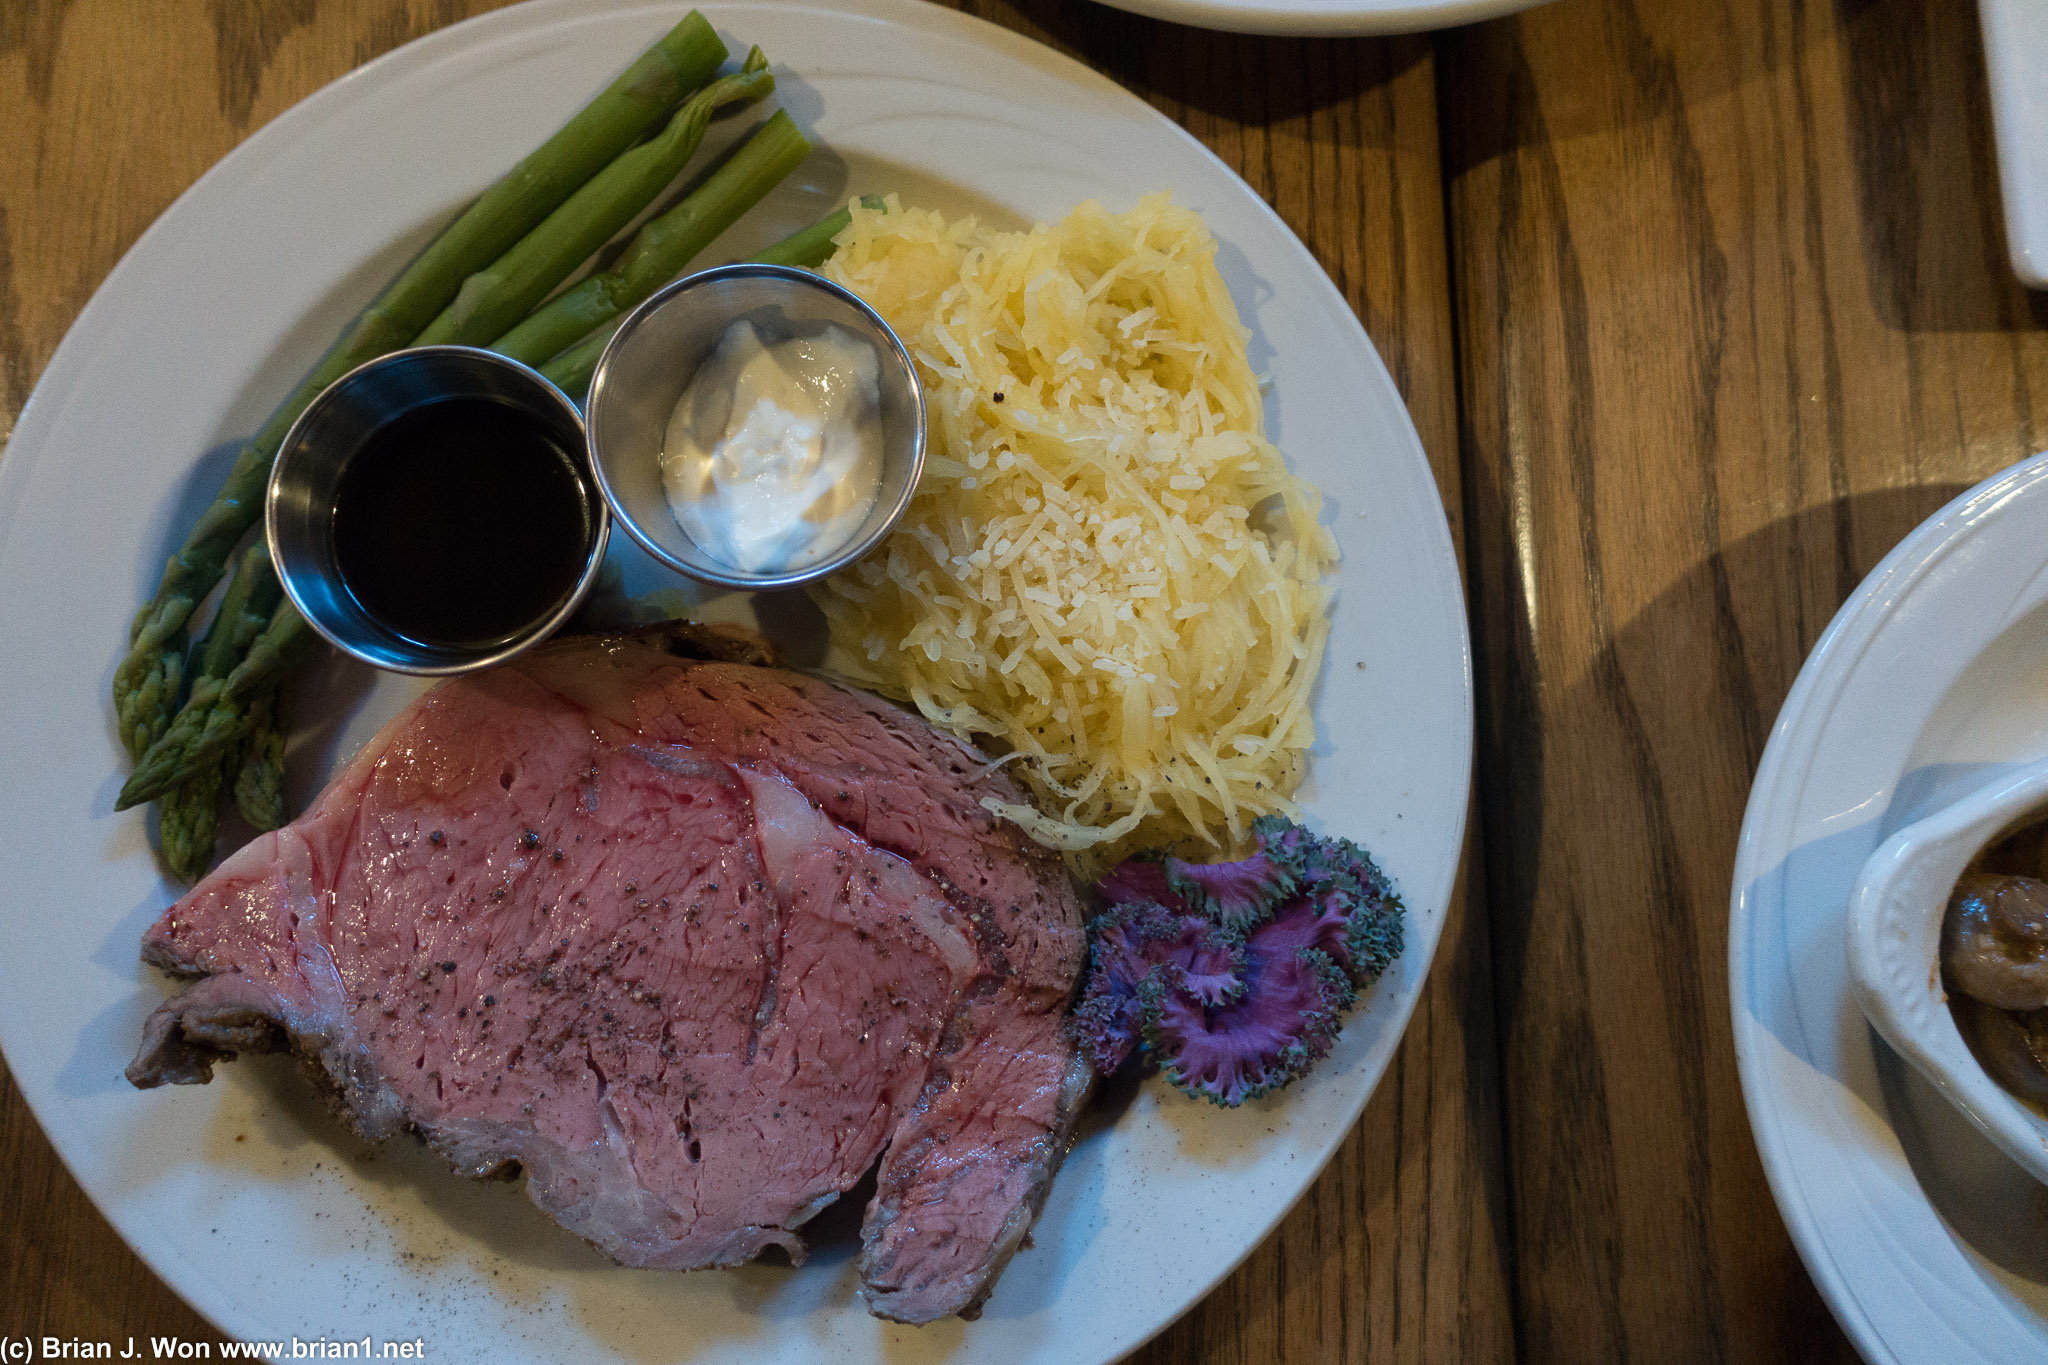 Not a bad looking (or tasting!) prime rib.